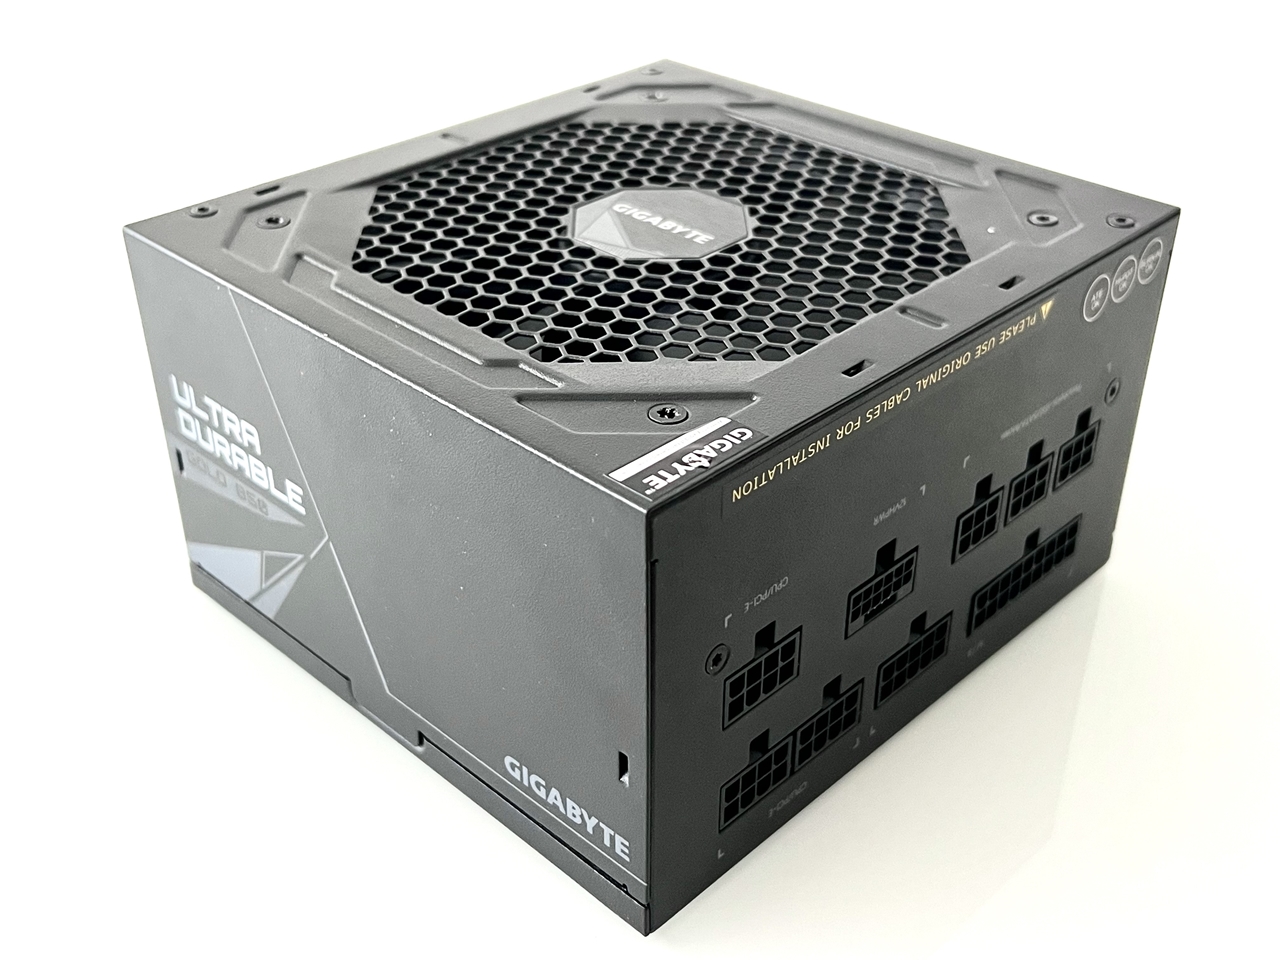 Gigabyte Ultra Durable 850W Power Supply Review